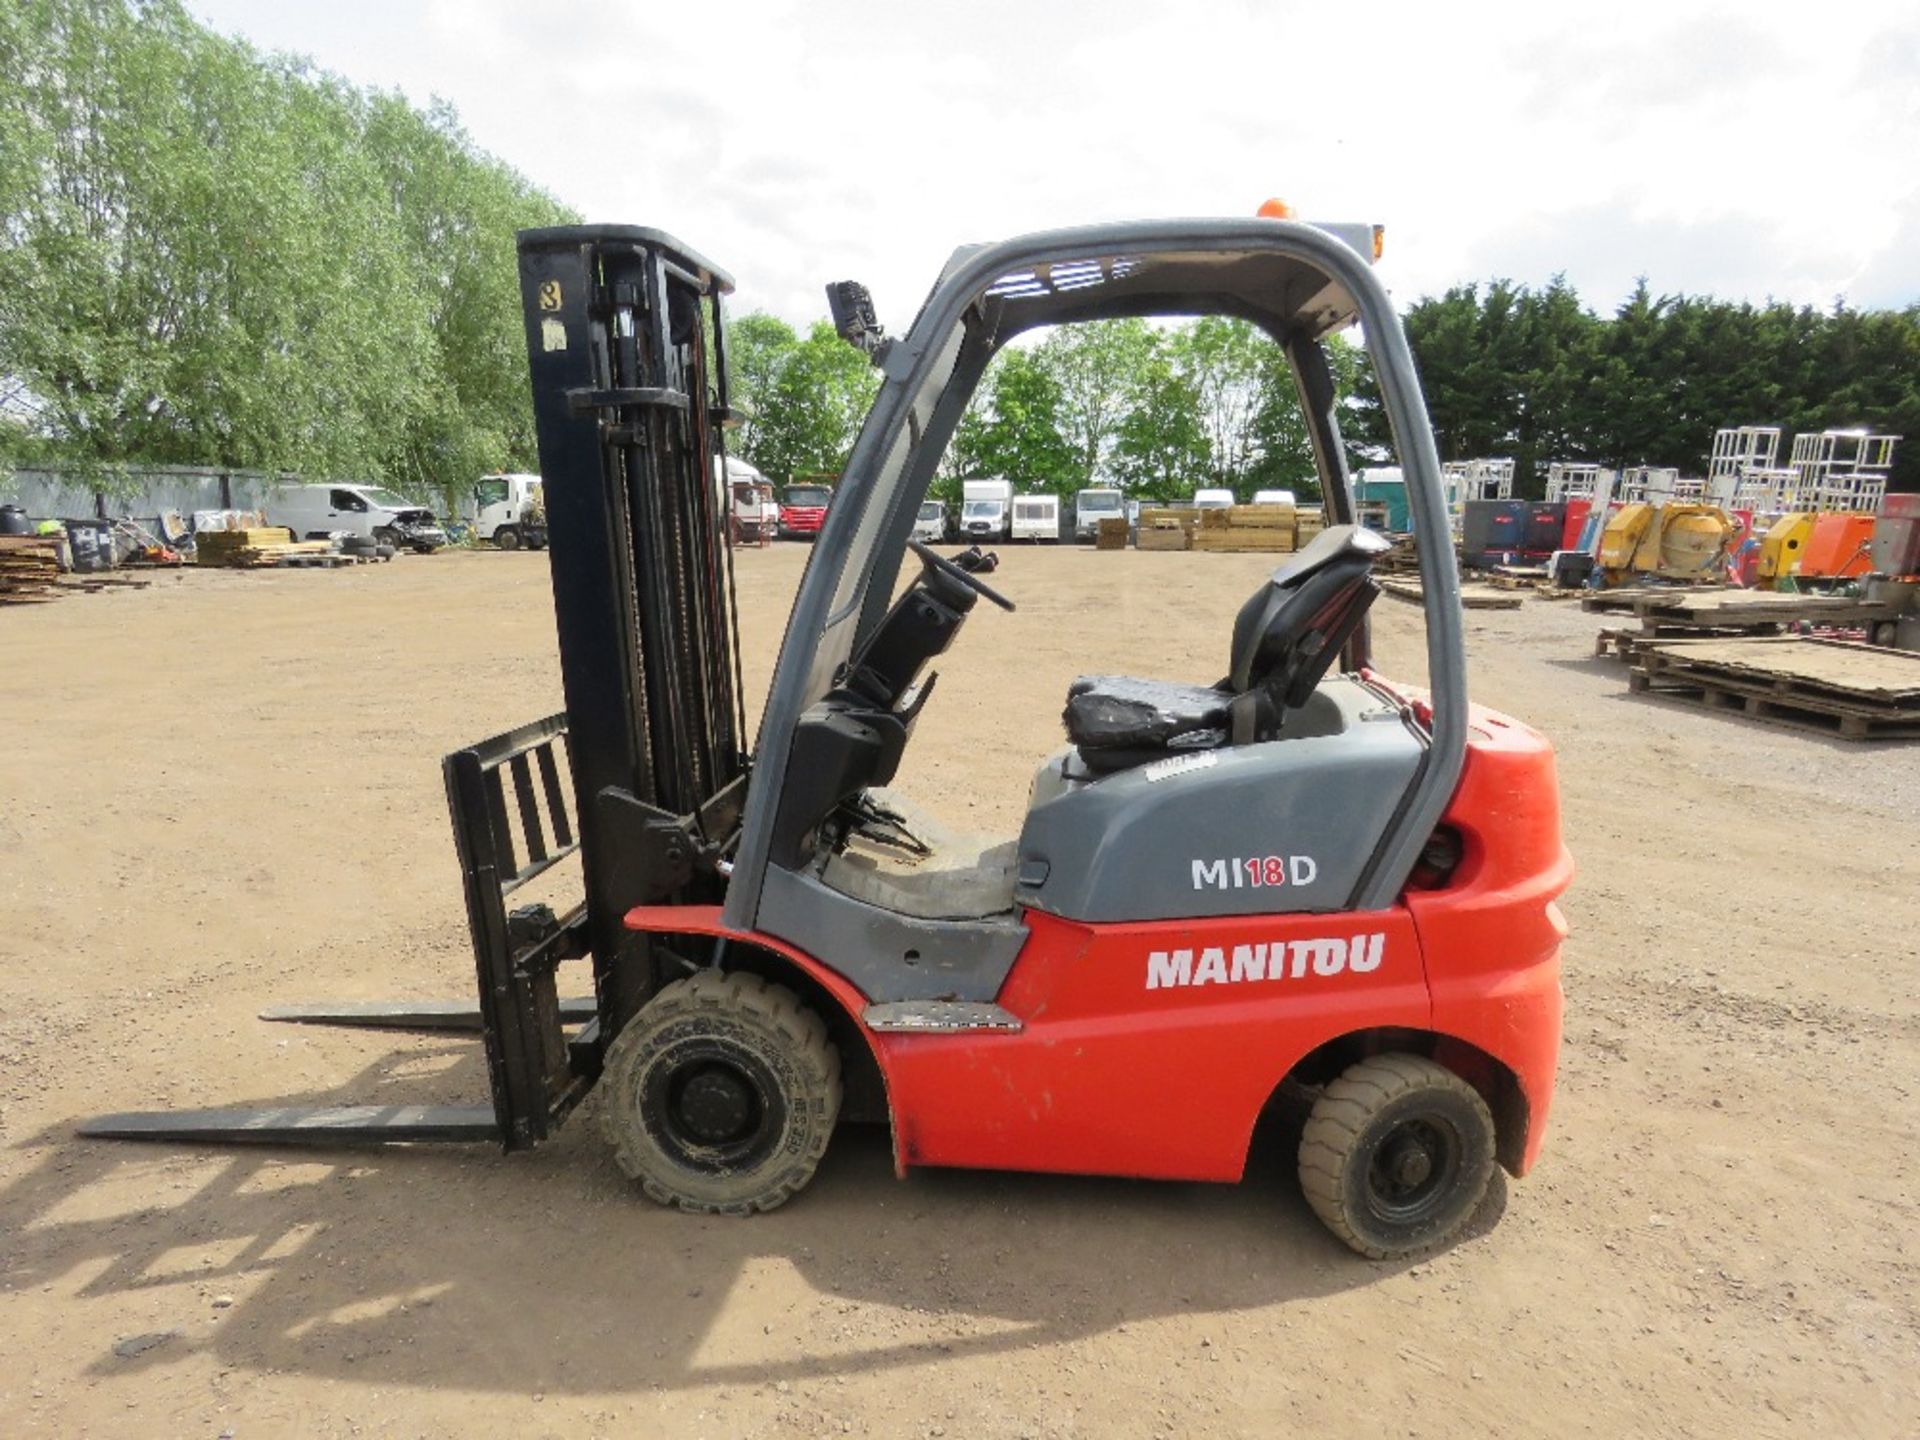 MANITOU MI 18D DIESEL ENGINED FORKLIFT TRUCK, YEAR 2016. WHEN TESTED WAS SEEN TO DRIVE, STEER AND BR